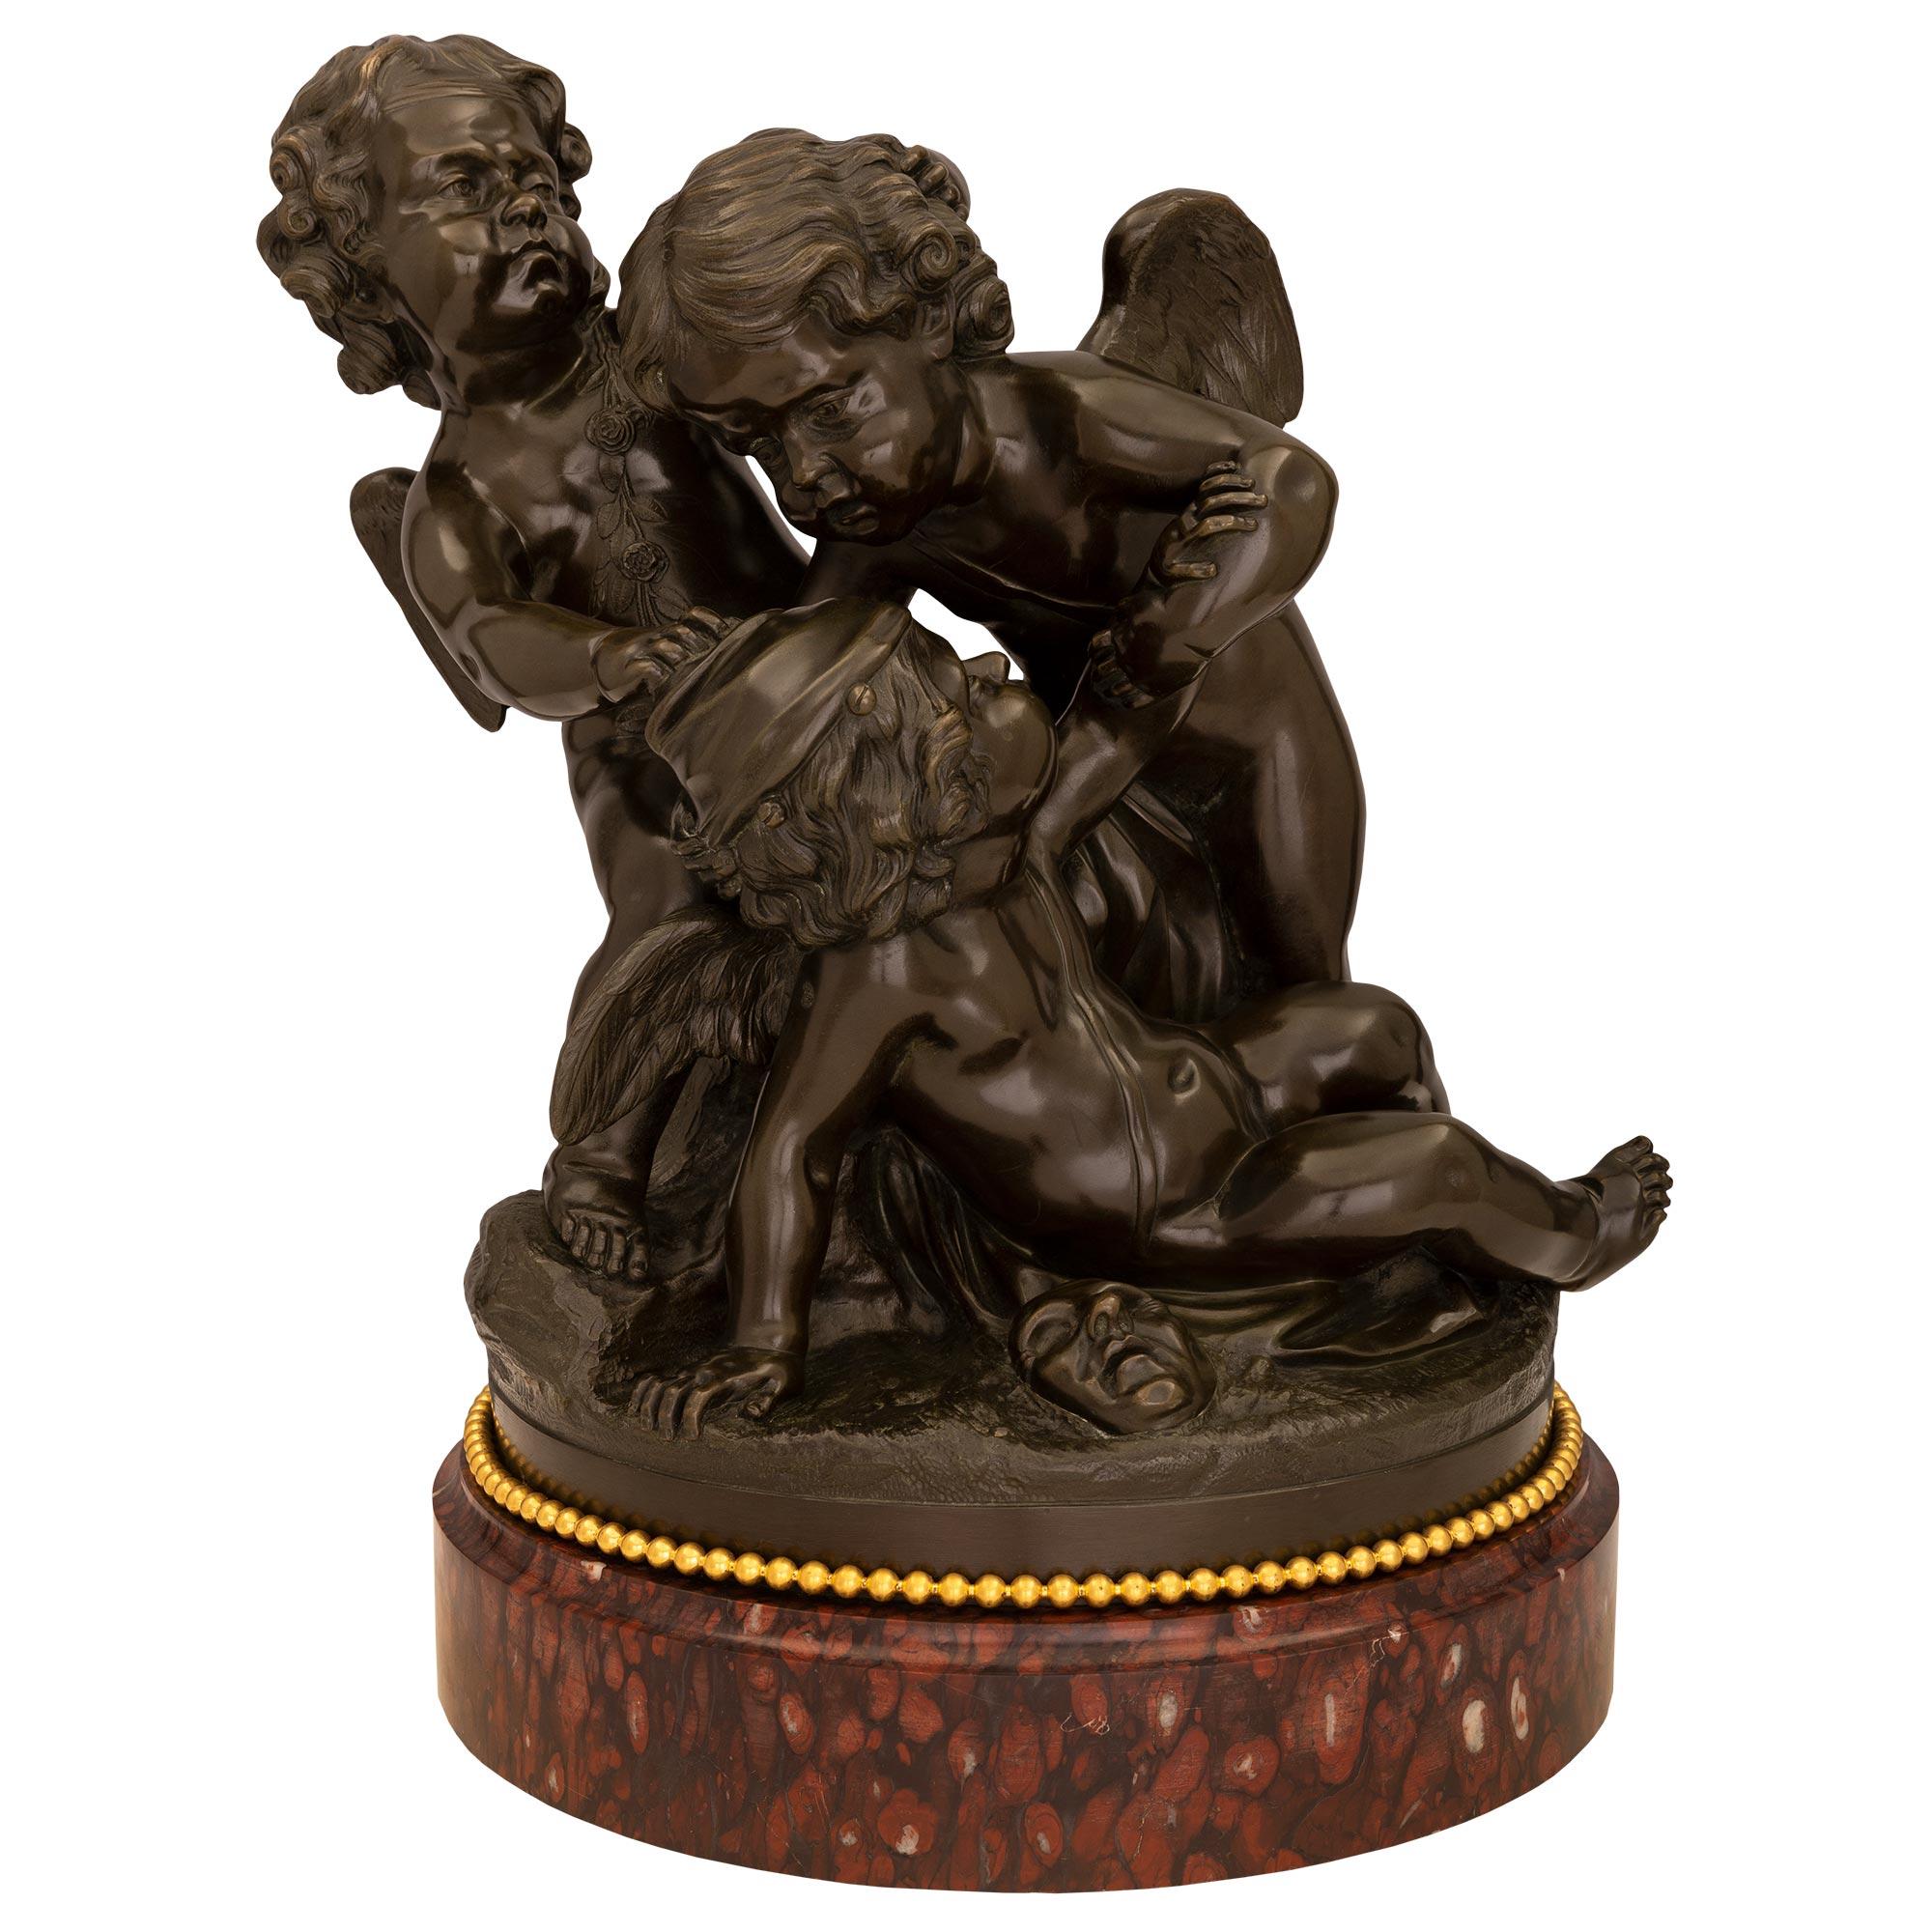 A charming and high quality French mid 19th century Louis XVI st. patinated bronze, ormolu and marble statue, after Clodion. The statue is raised by a a thick Rouge Griotte marble base decorated by an ormolu beaded band. The rich and warm patinated